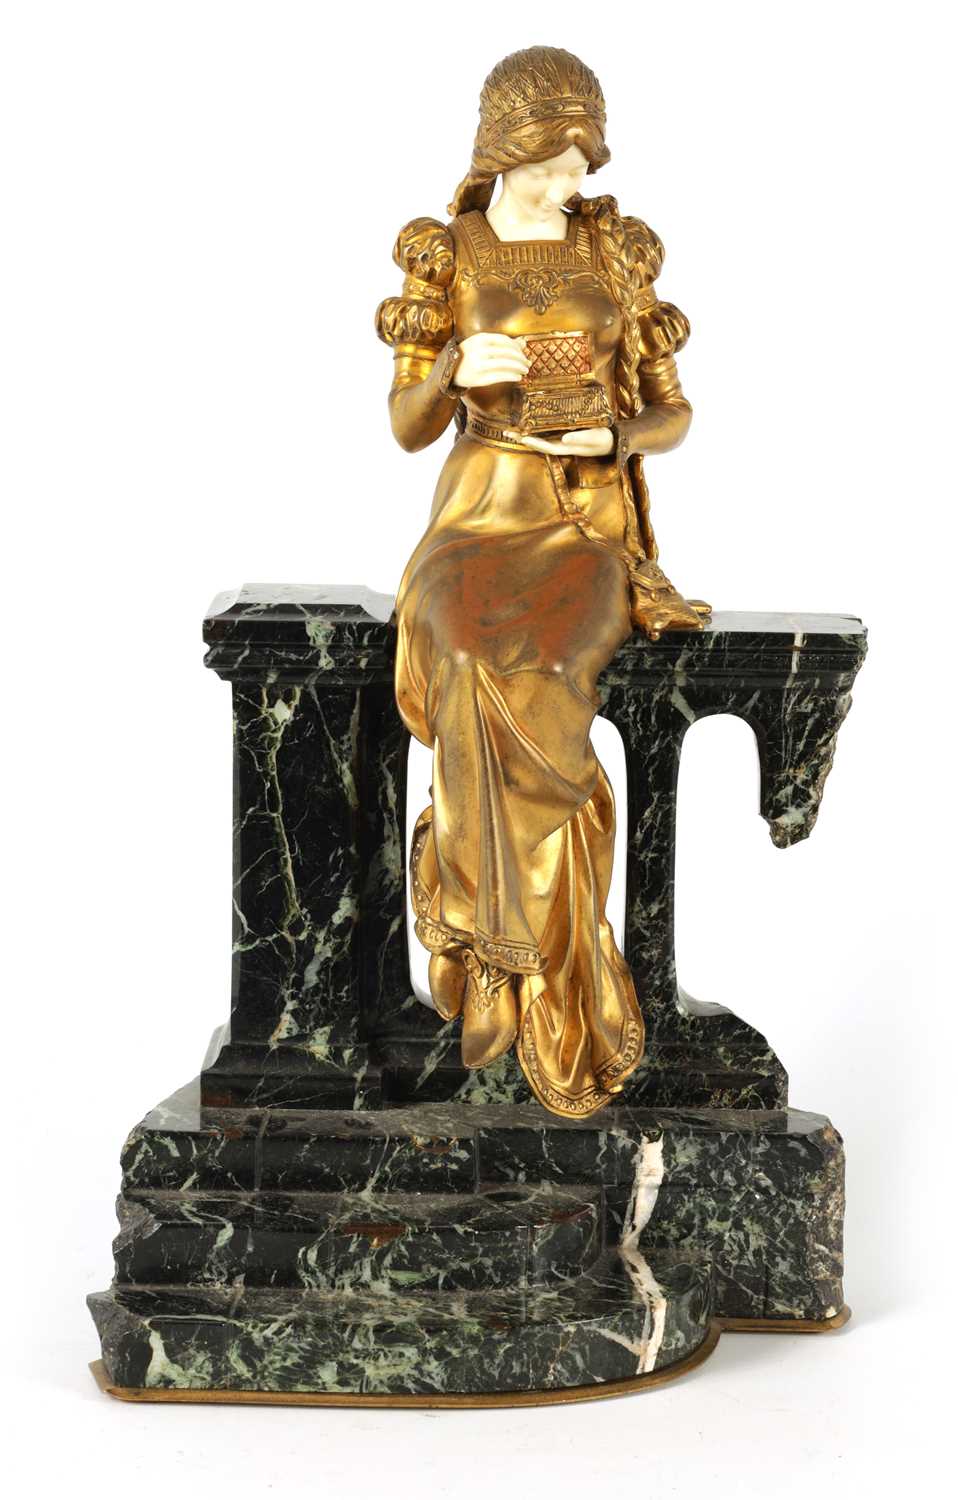 A LATE 19TH CENTURY ART NOUVEAU GILT BRONZE AND IVORY FIGURE OF A SEATED YOUNG LADY